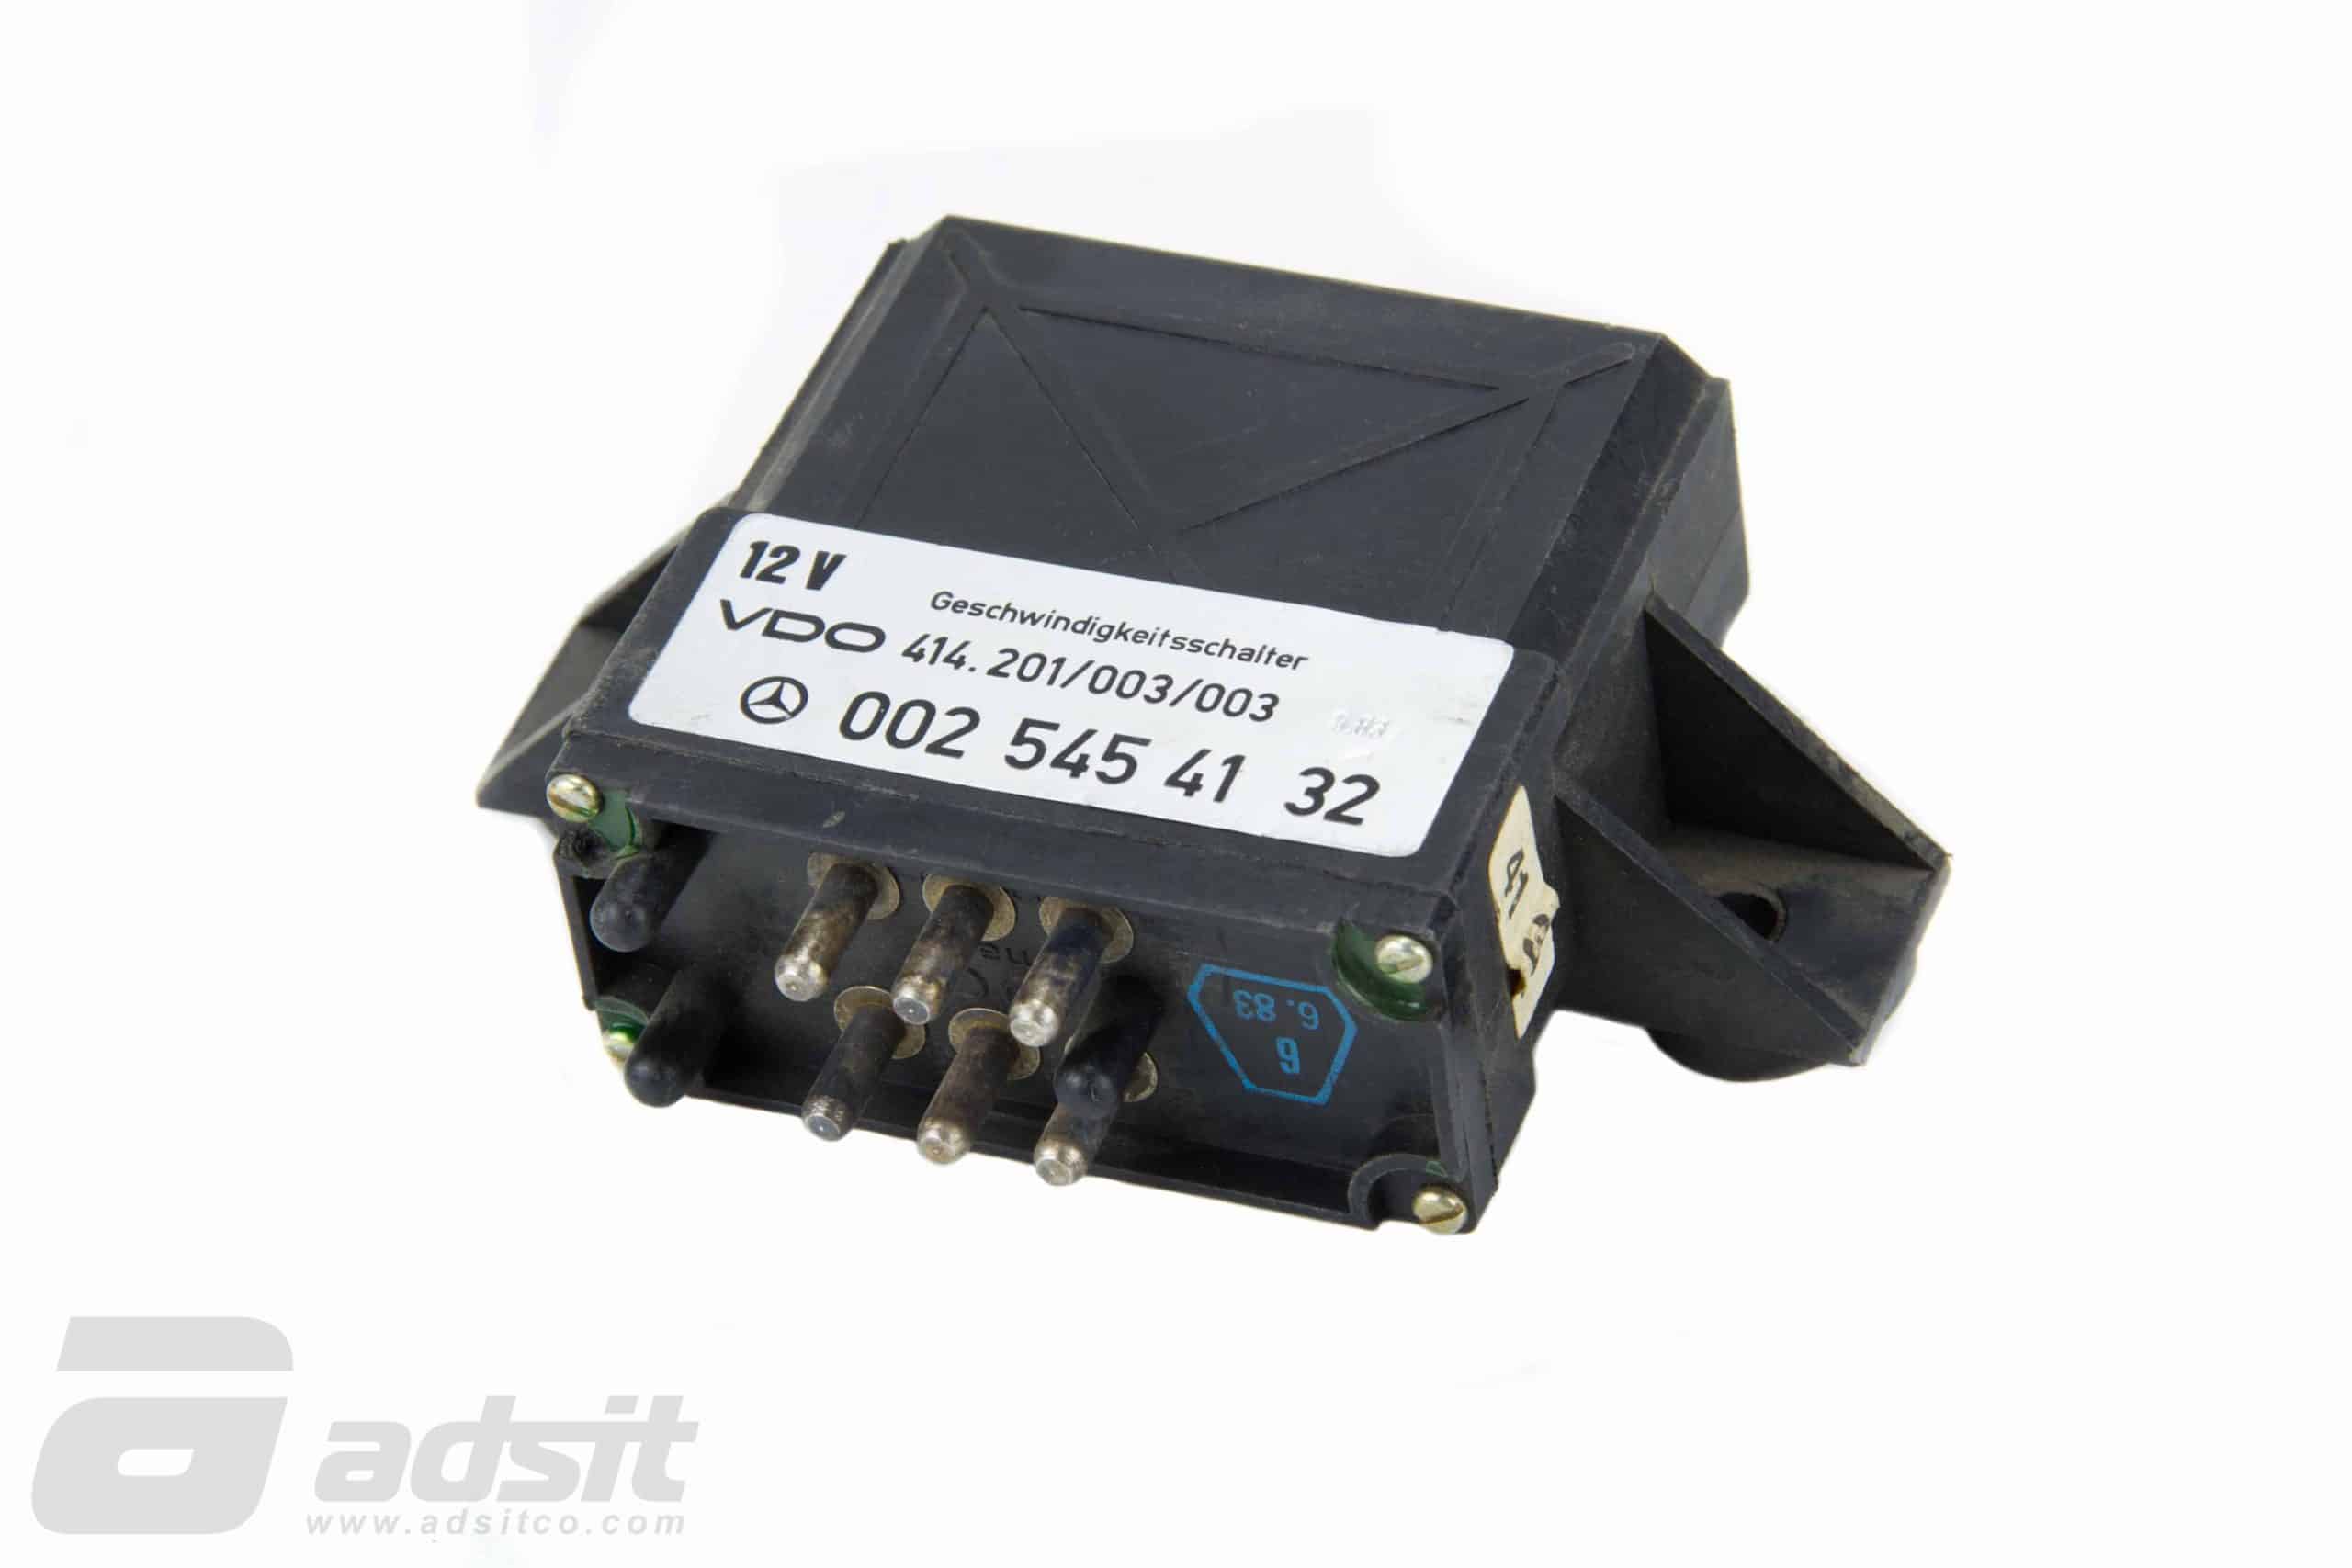 RELAY SPEED SWITCH FOR TRANSMISSION